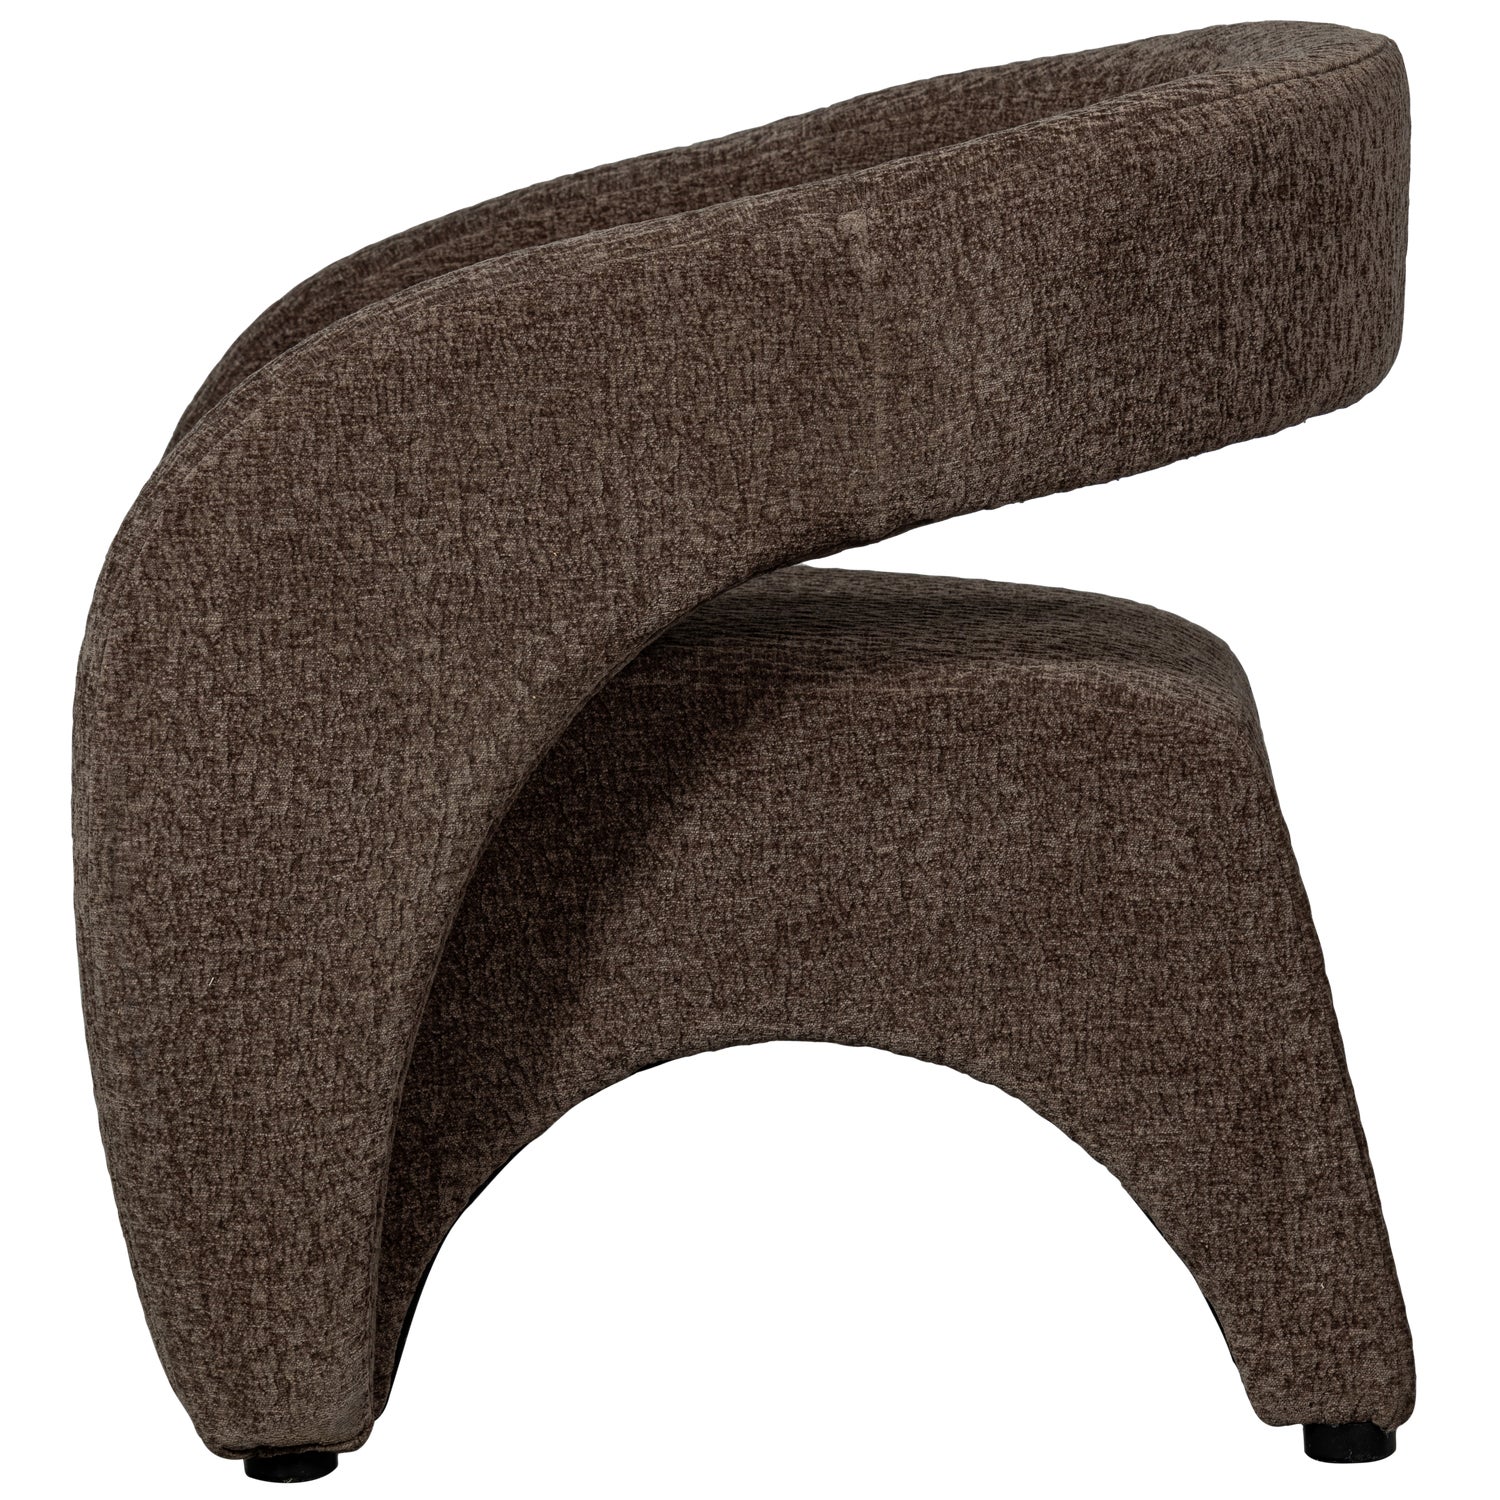 801432-E-03_VS_BP_Radiate_fauteuil_textured_espresso.png?auto=webp&format=png&width=1500&height=1500